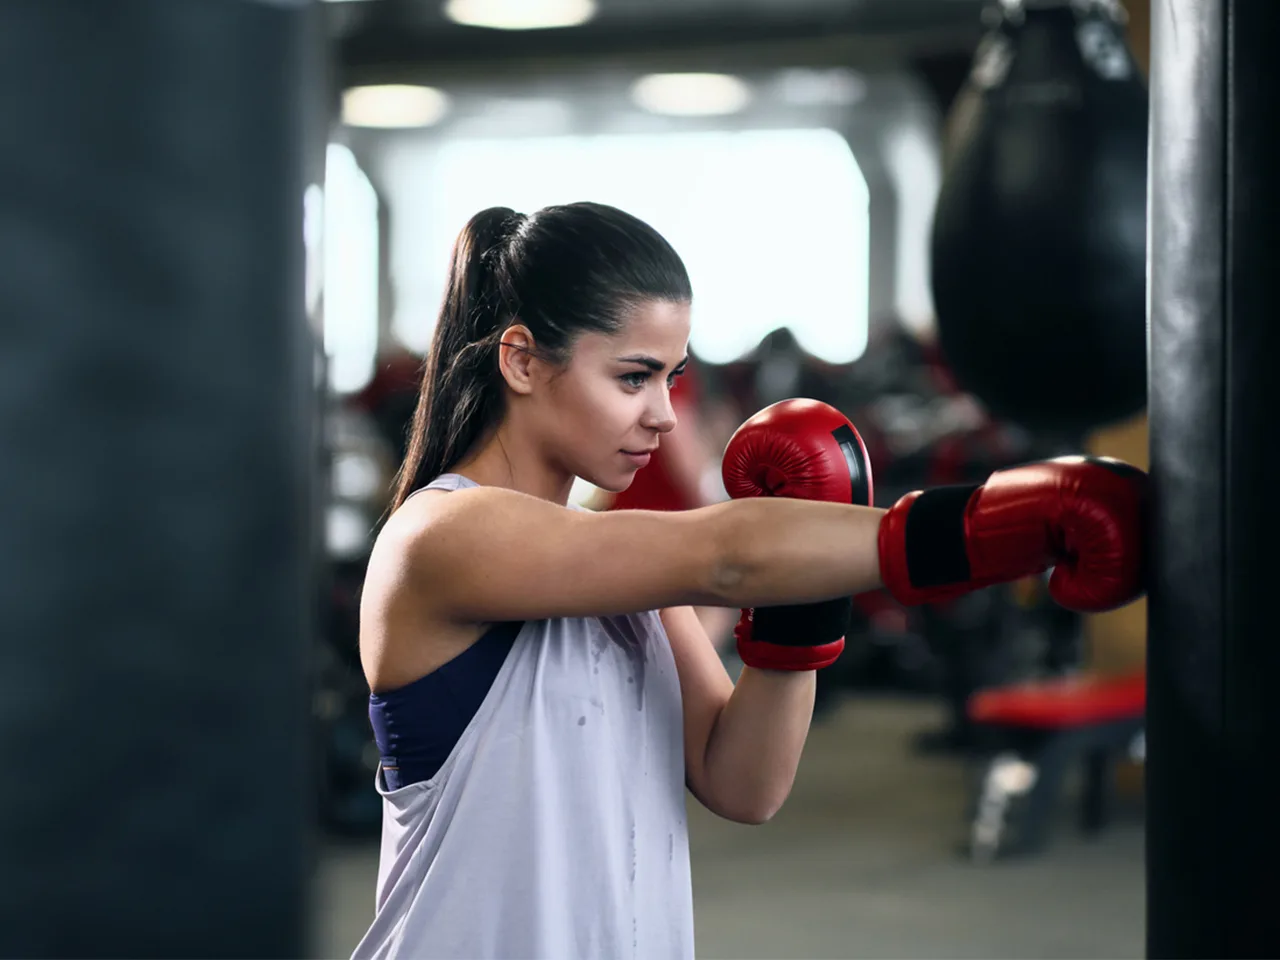 A young woman extends her arms in a boxing pose.